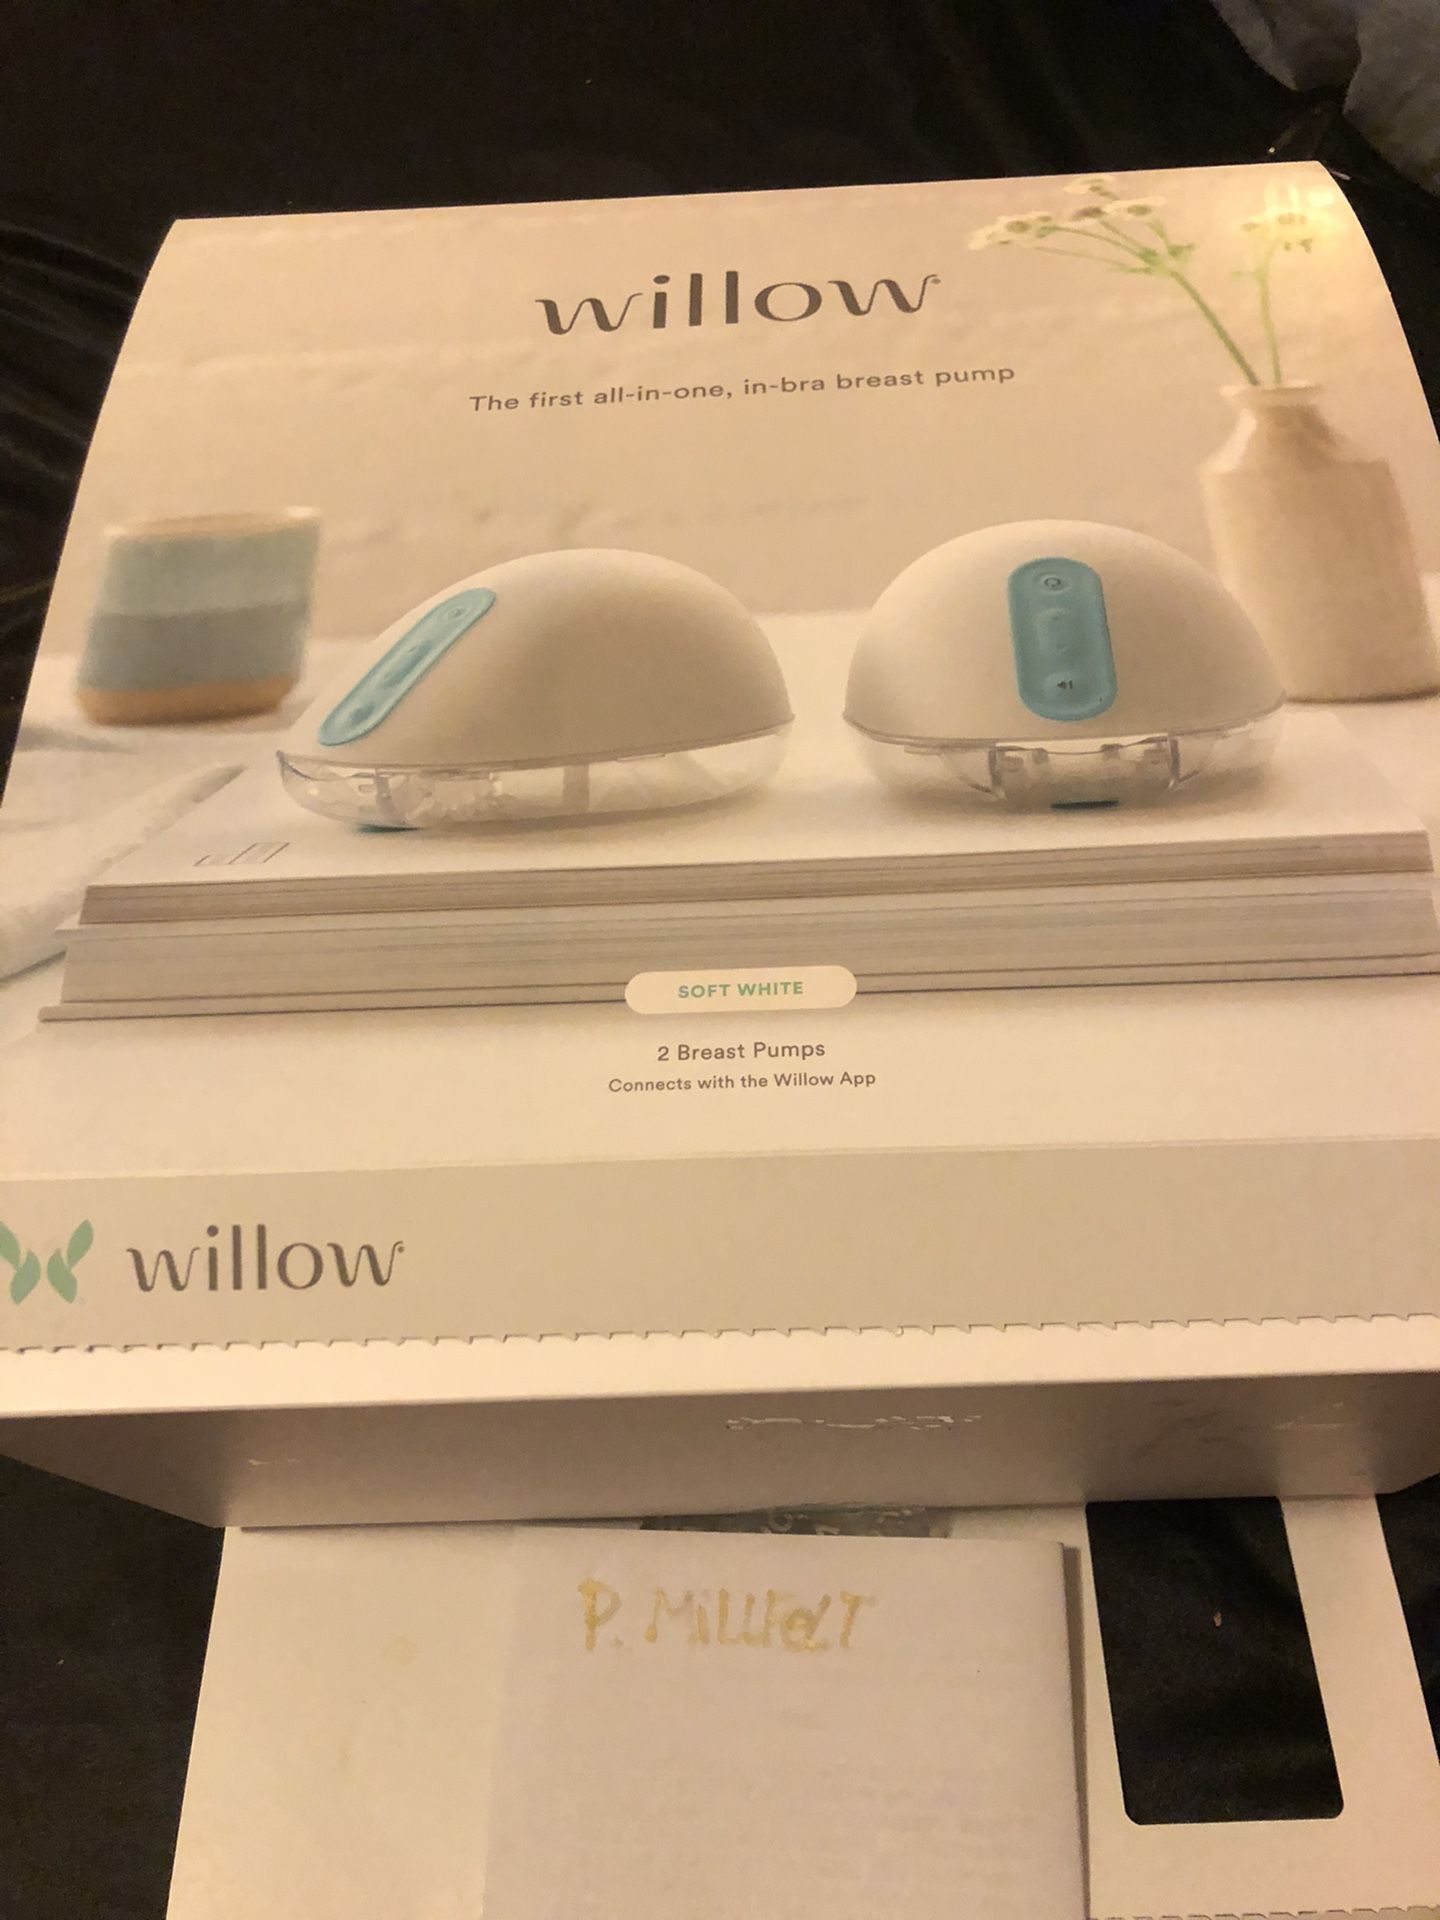 Willow 2.0 breast pump